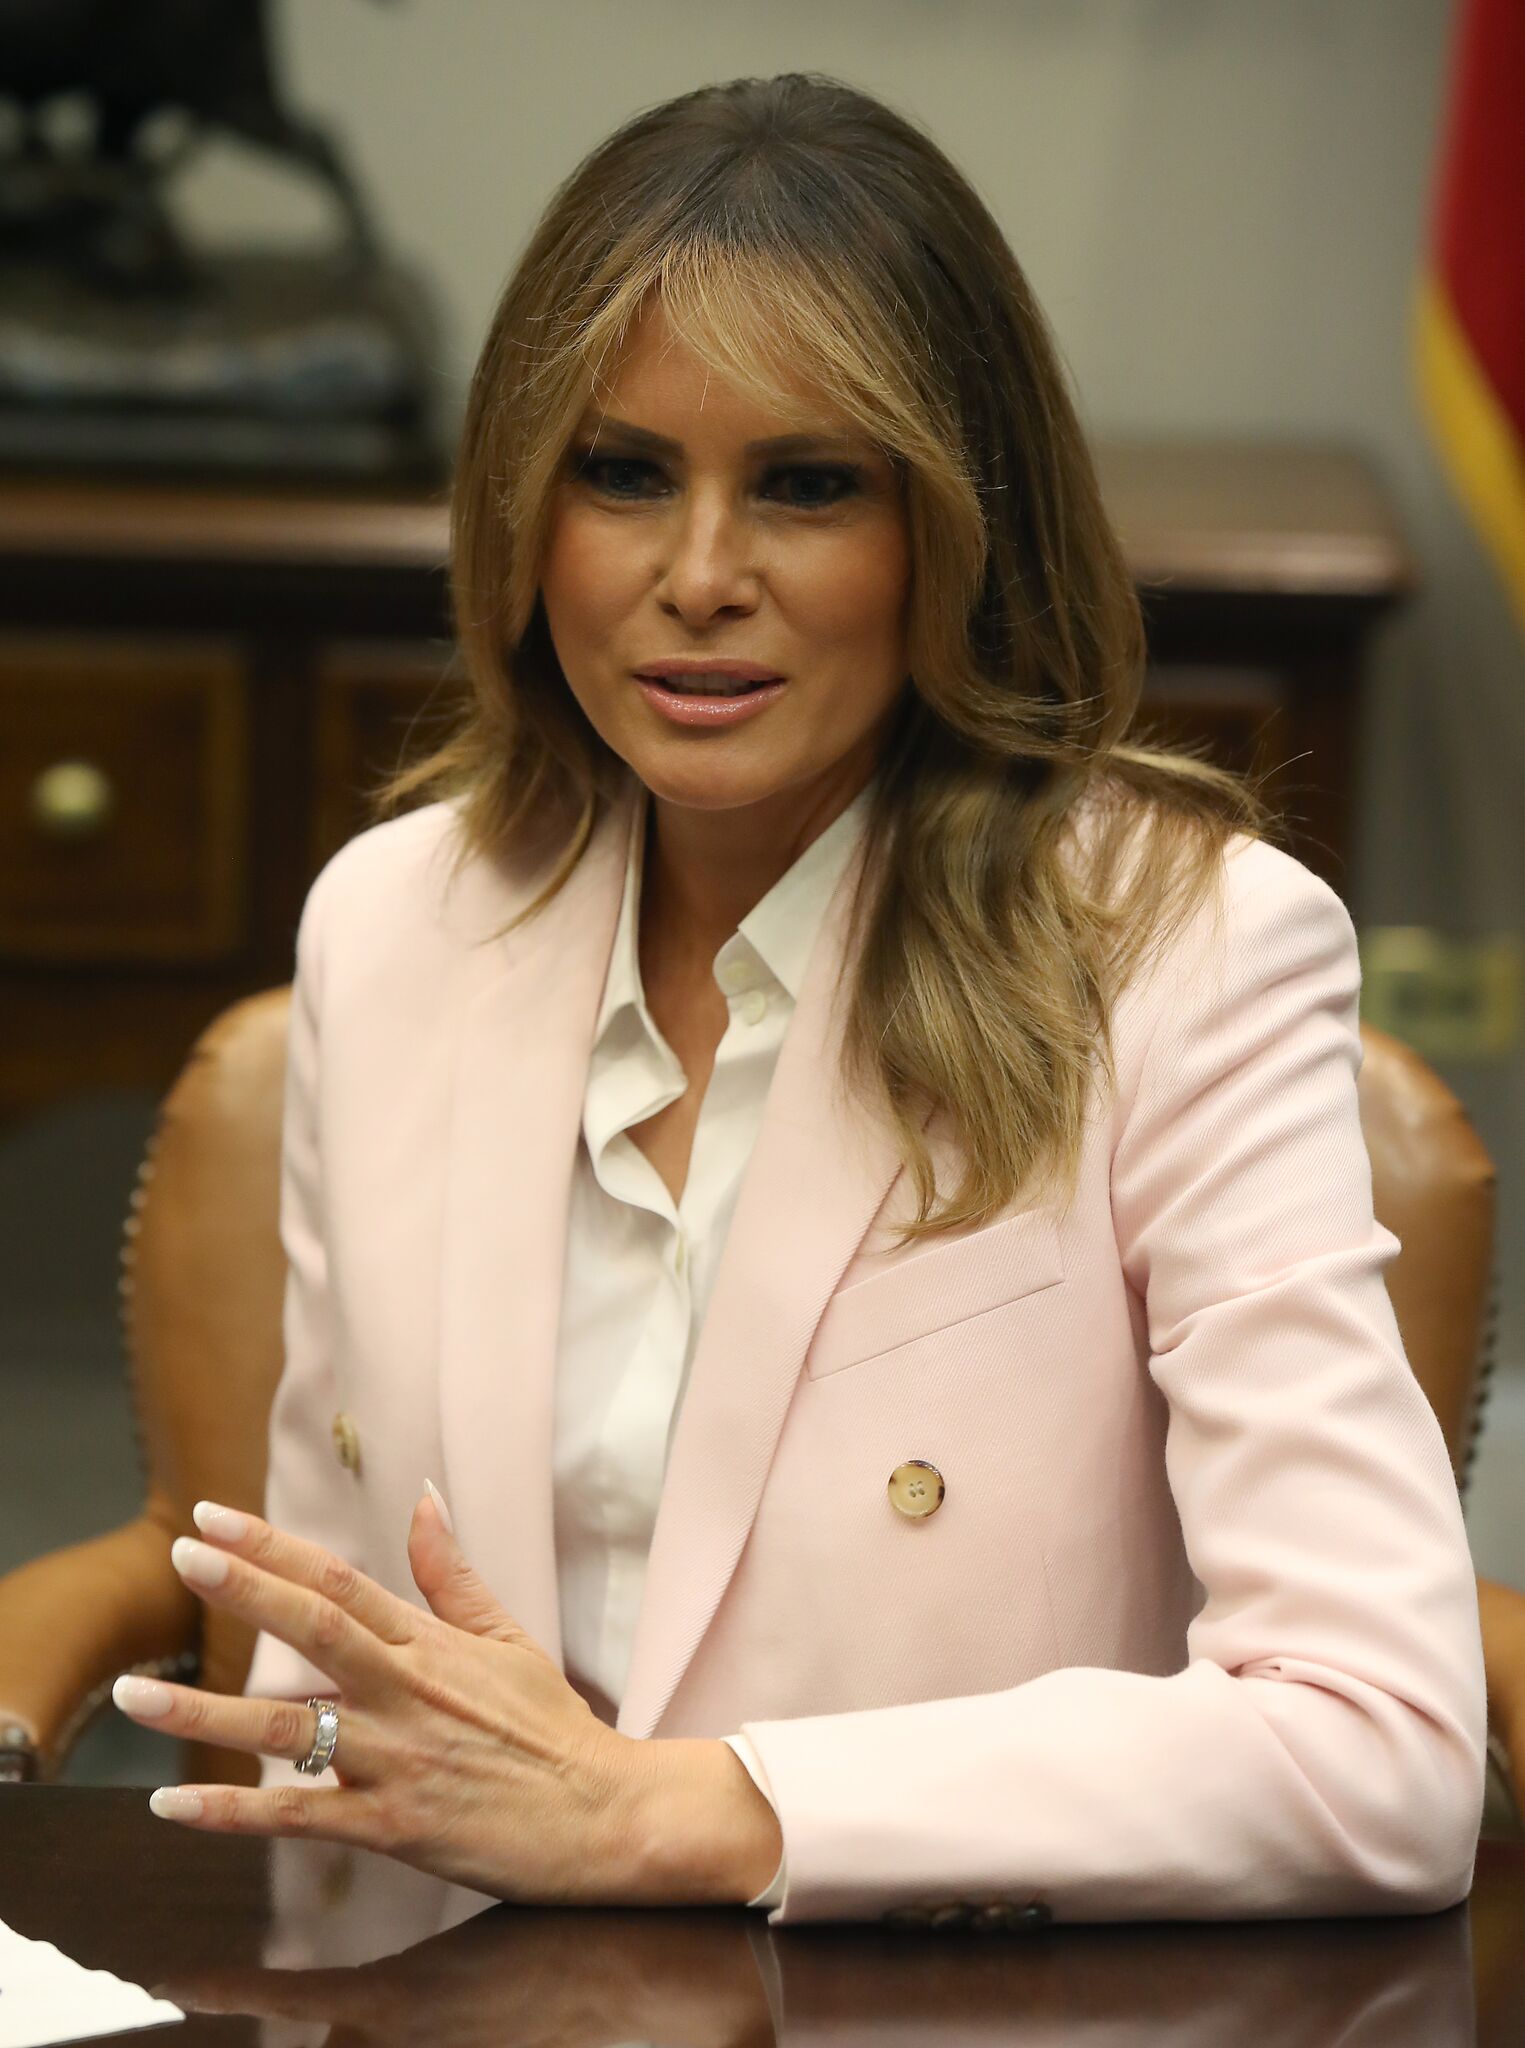 First lady Melania Trump speks during a roundtable discussion on the administration's efforts to combat the opioid epidemic, in the Roosevelt Room at the White House on June 12, 2019 | Photo: Getty Images